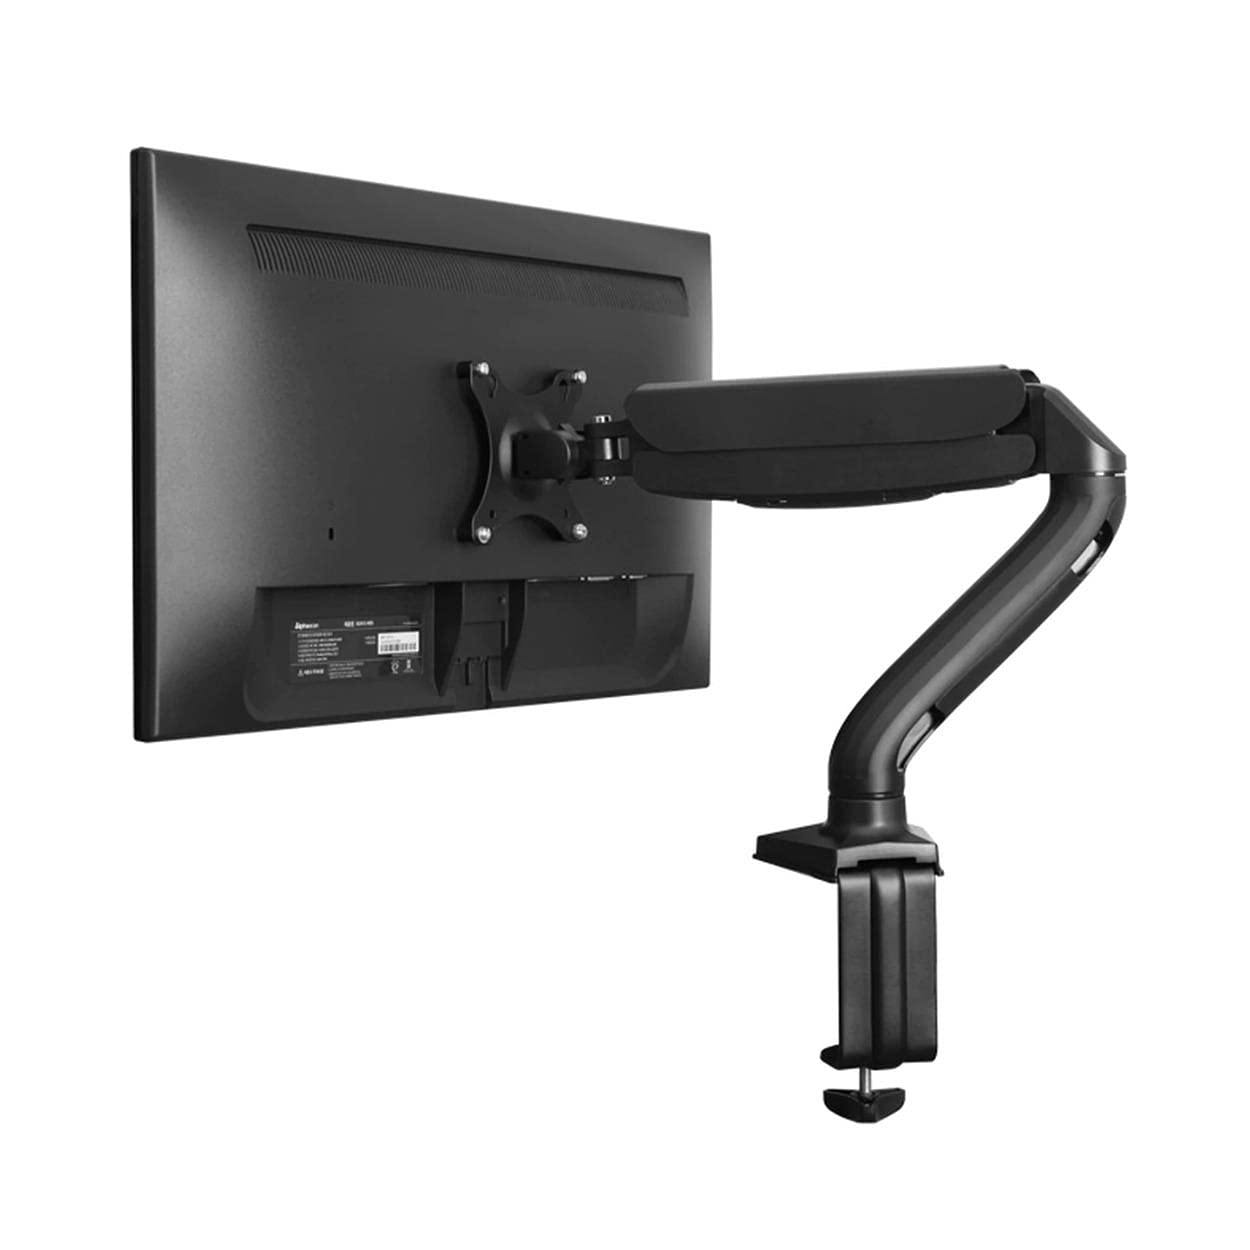 Single Computer Monitor Arm with 2 USB Ports adjustable height universal mount lcd holder sit stand-up standing desk accessory organizer one screen swivel pan tilt screens black